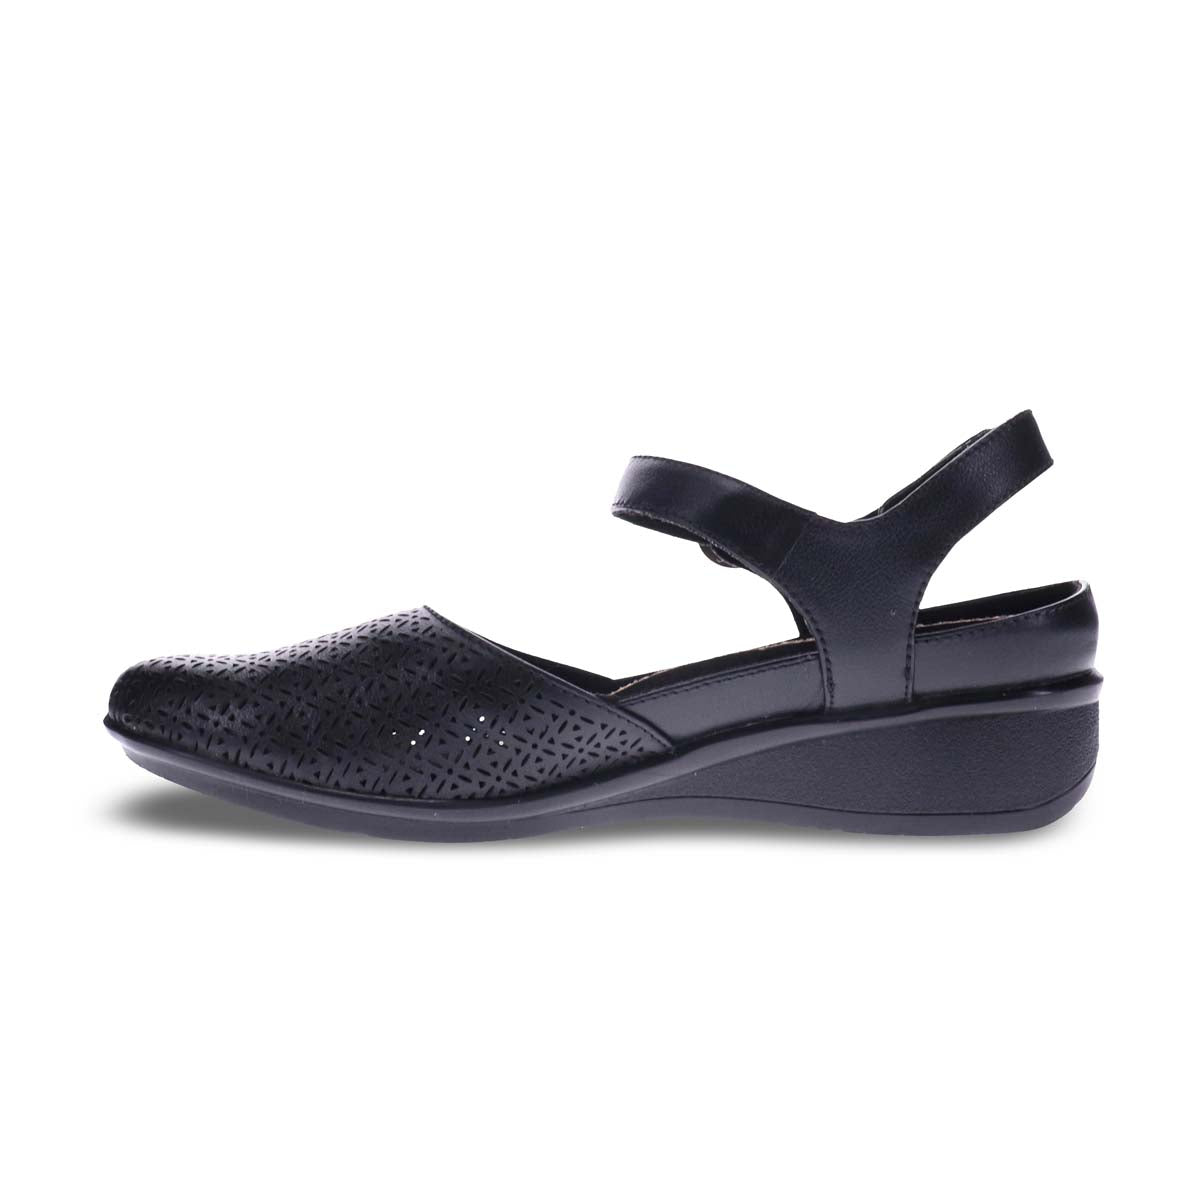 REVERE CALABRIA WOMEN SANDALS IN BLACK - TLW Shoes